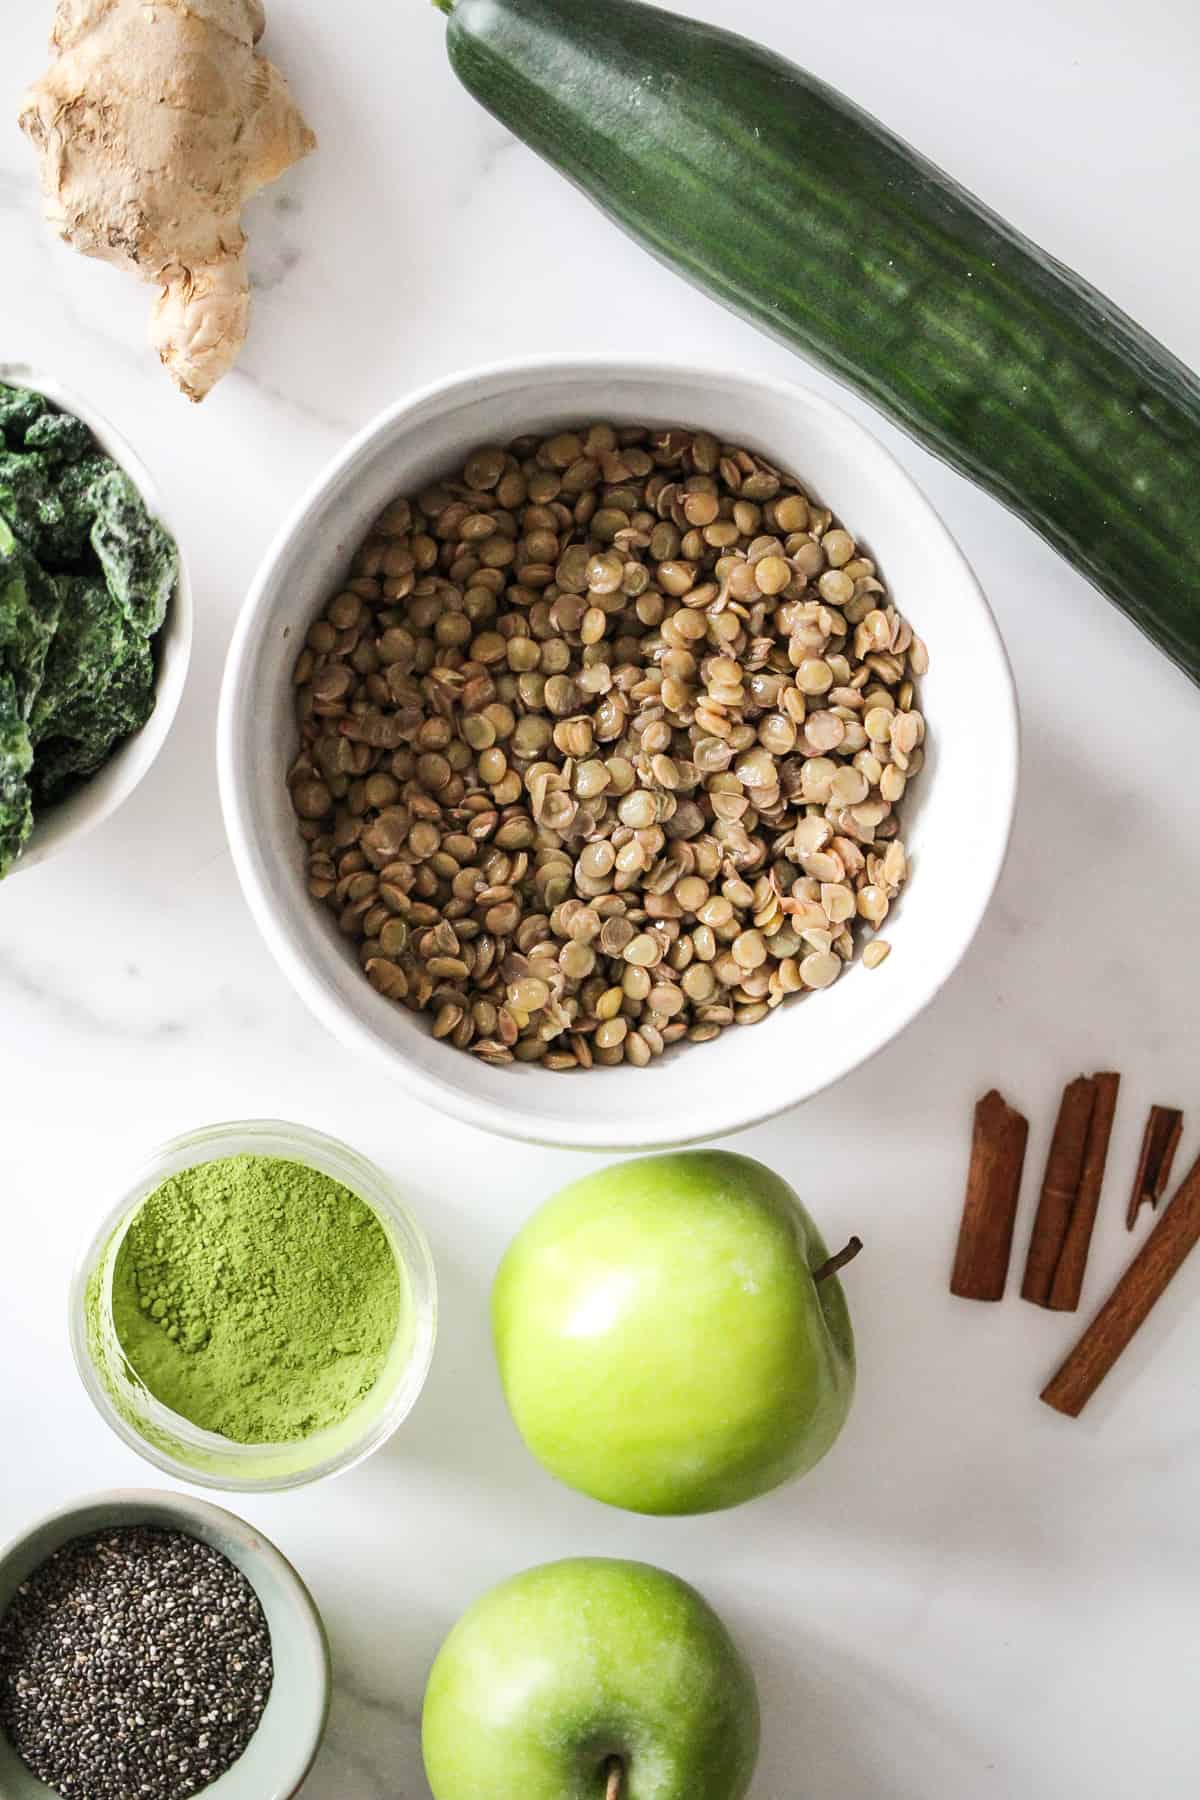 Flatlay image of lentil smoothie ingredients, including cooked lentils, apples, cucumber, cinnamon, ginger, matcha, and chia seeds.